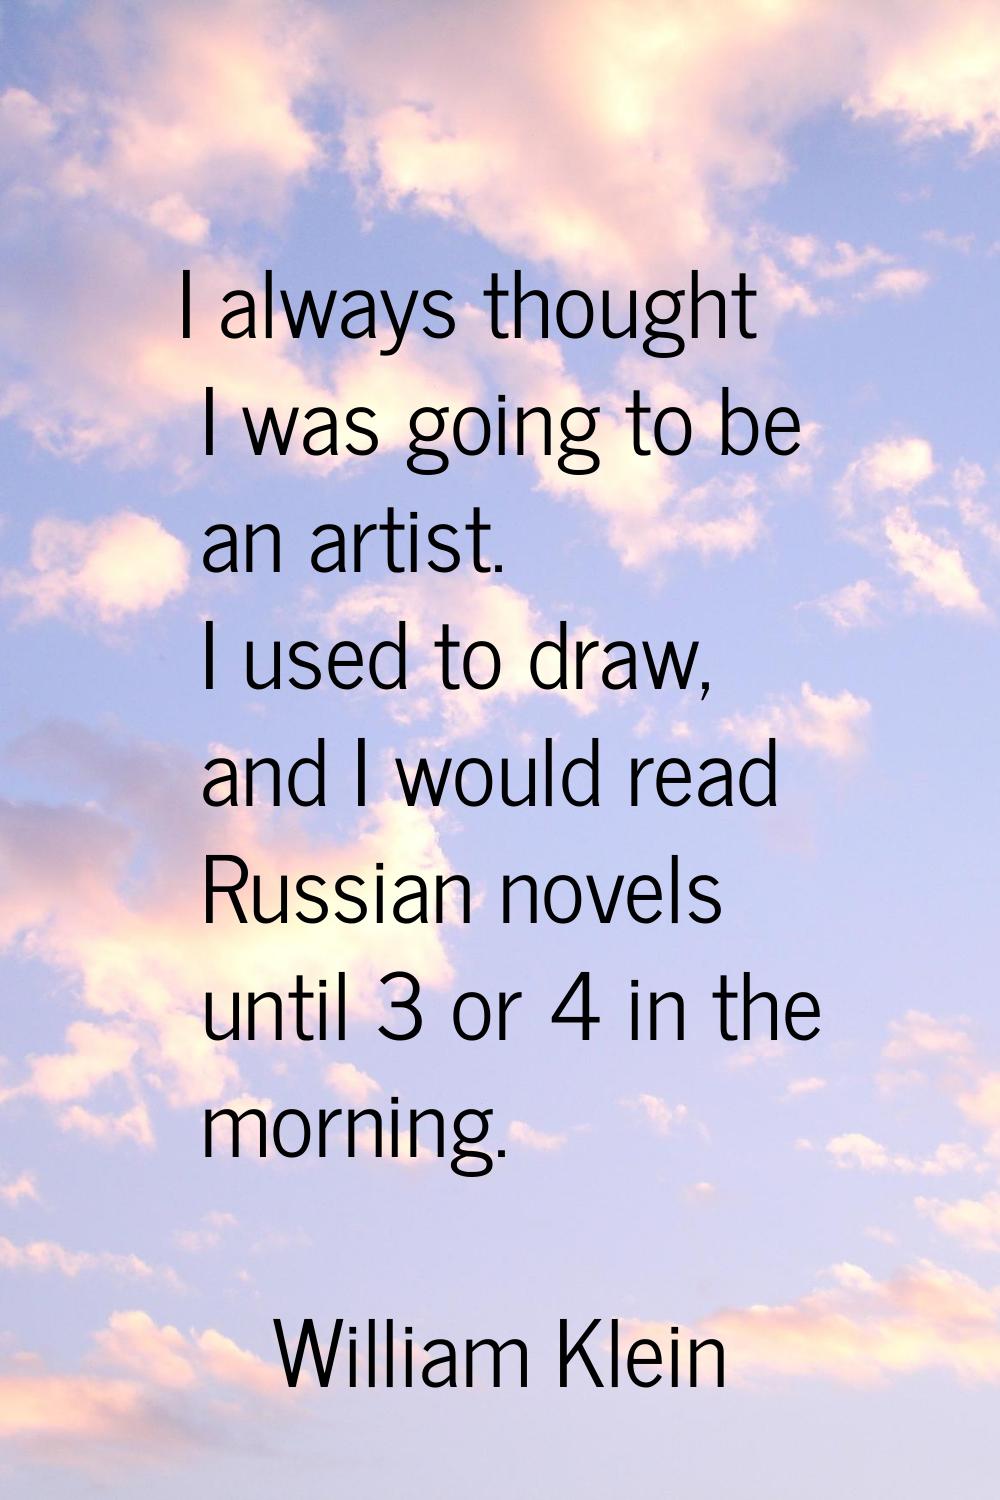 I always thought I was going to be an artist. I used to draw, and I would read Russian novels until